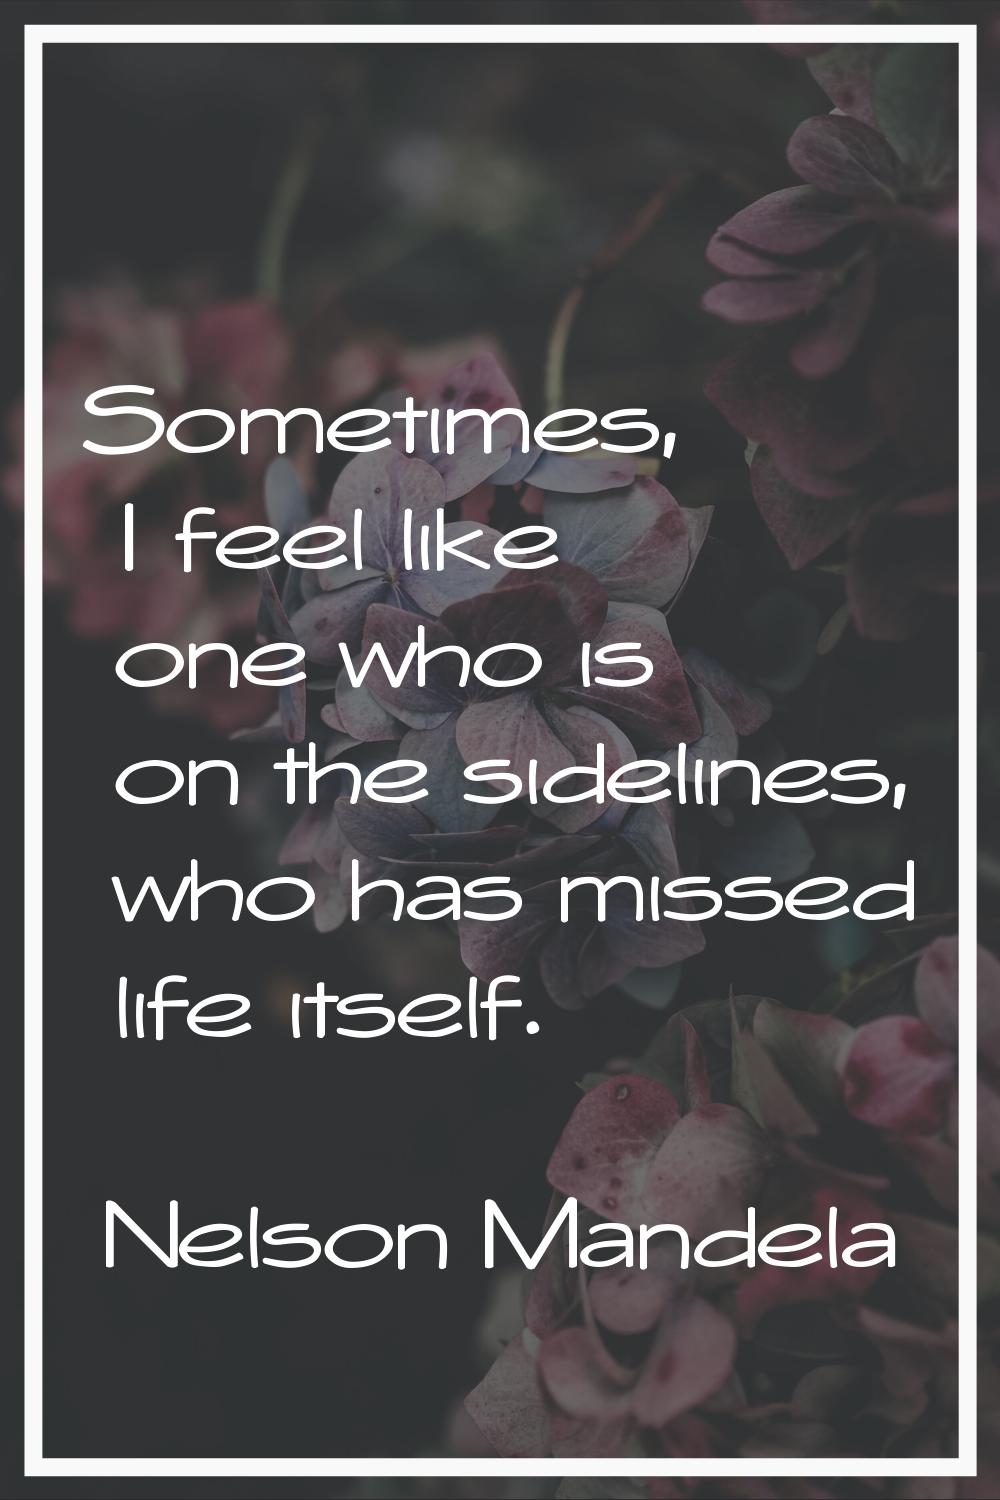 Sometimes, I feel like one who is on the sidelines, who has missed life itself.